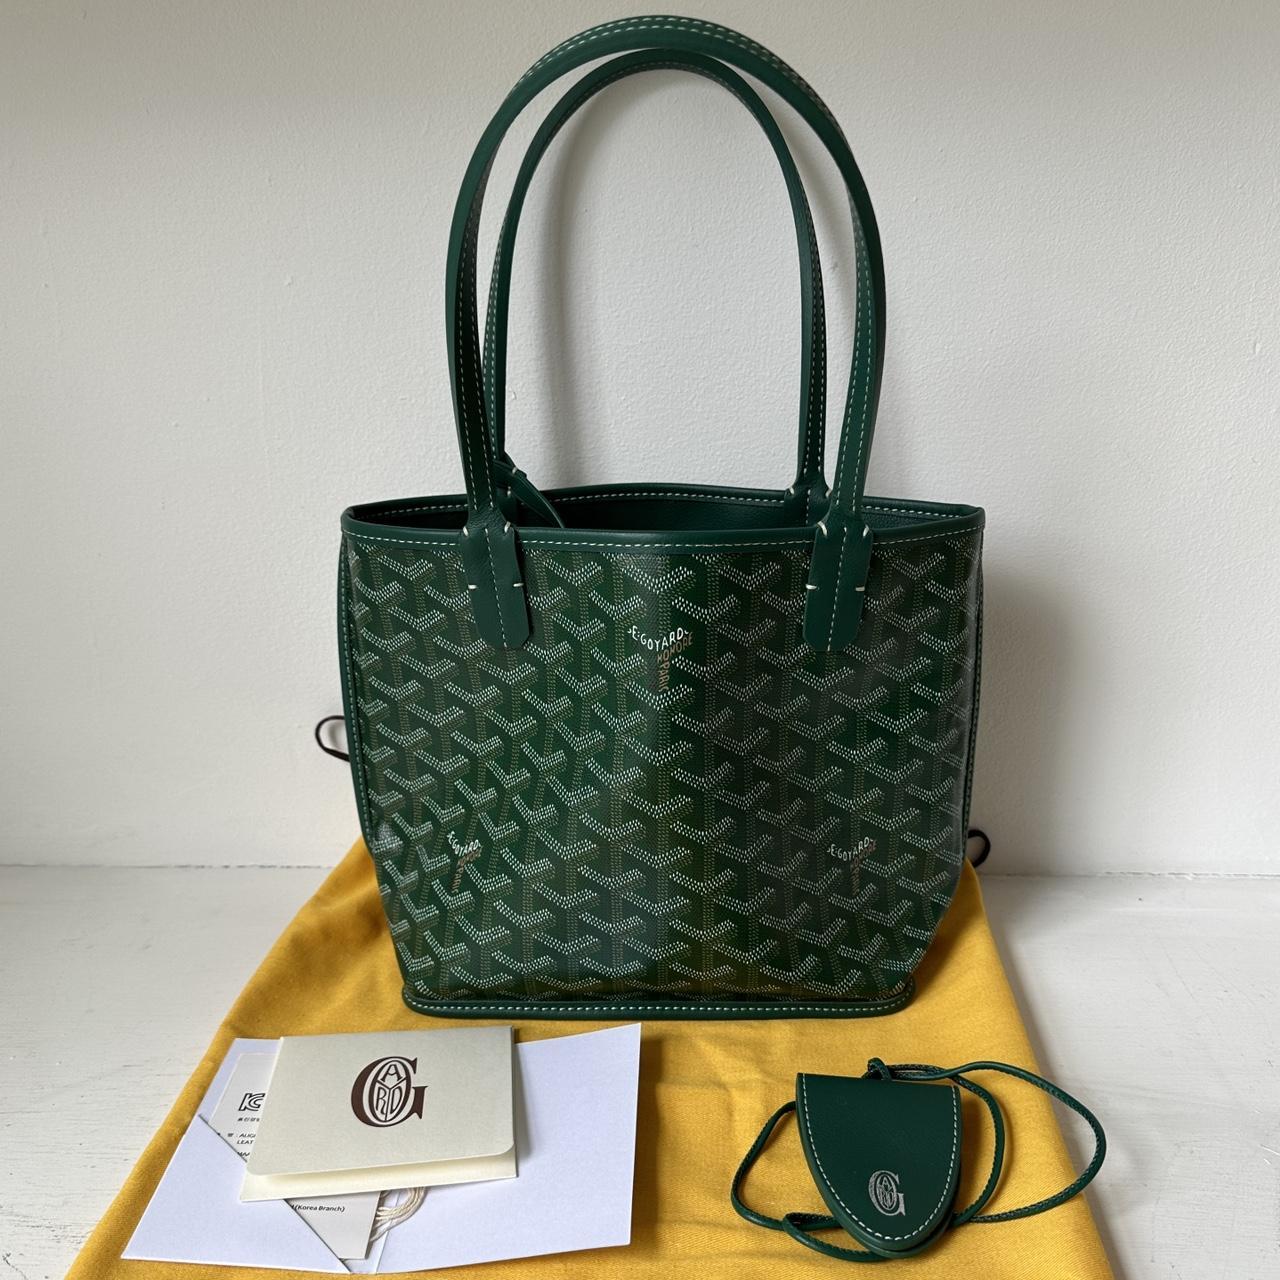 This Goyard tote bag is a stylish and high-quality - Depop